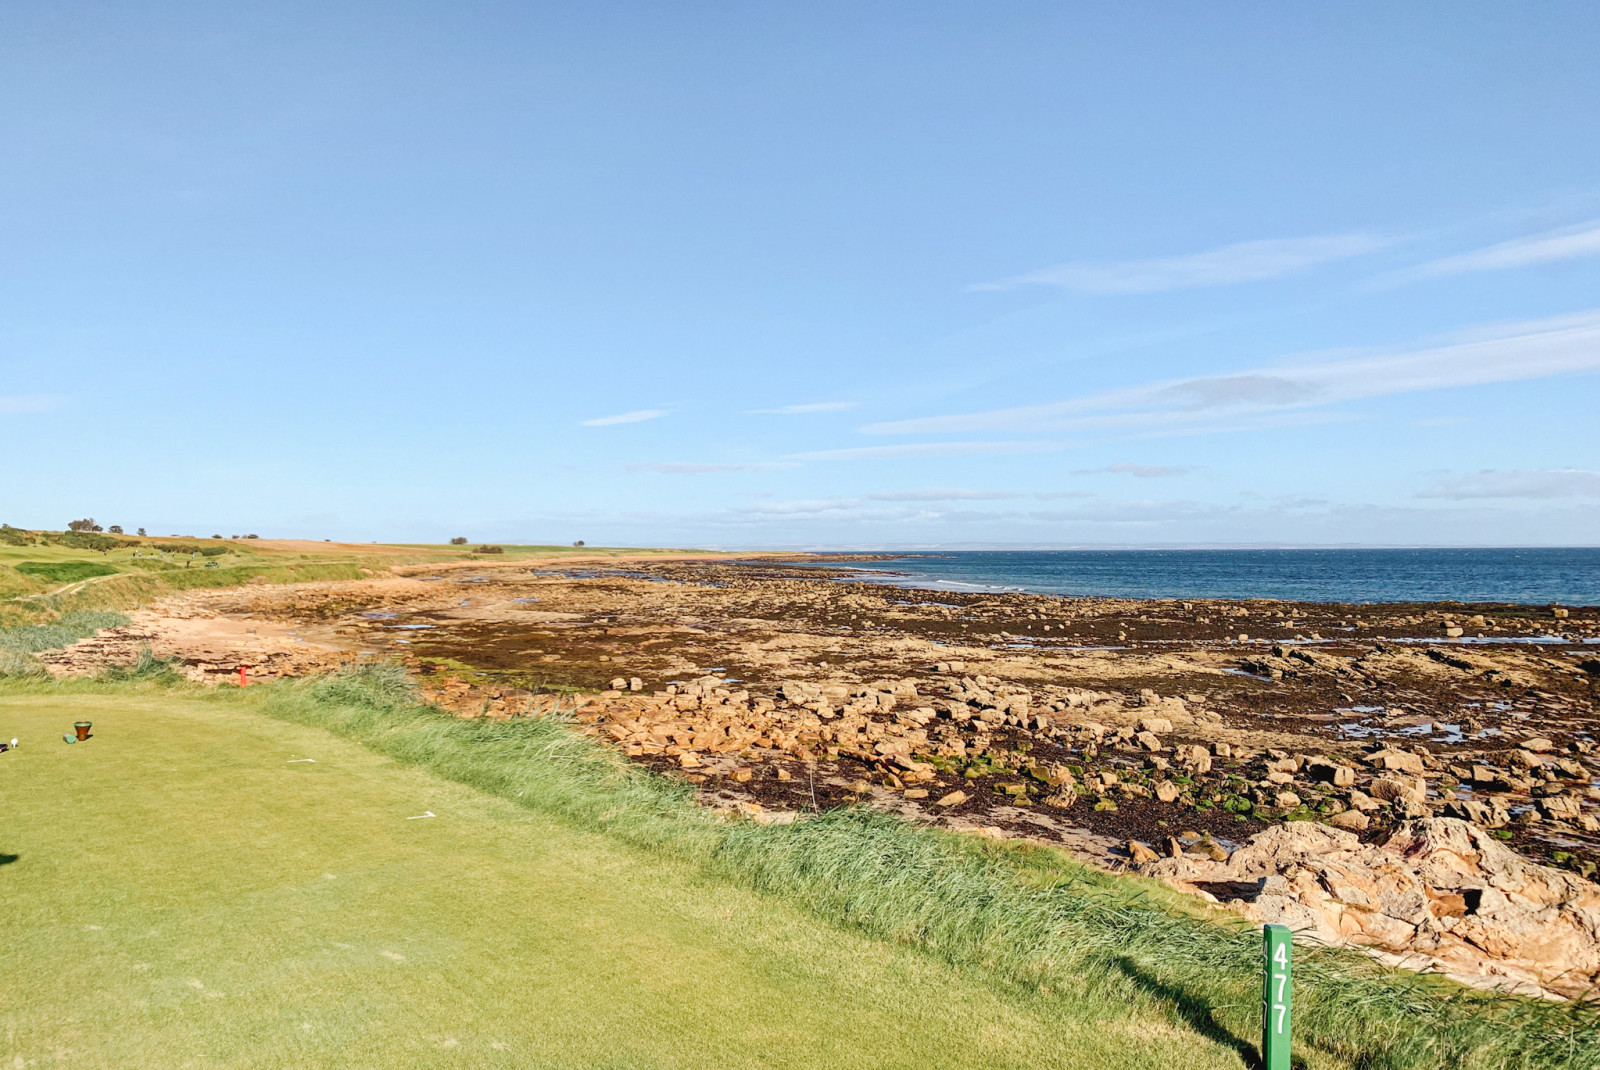 green grass golf course with a post that says 477 and tan rocks leading into blue ocean water